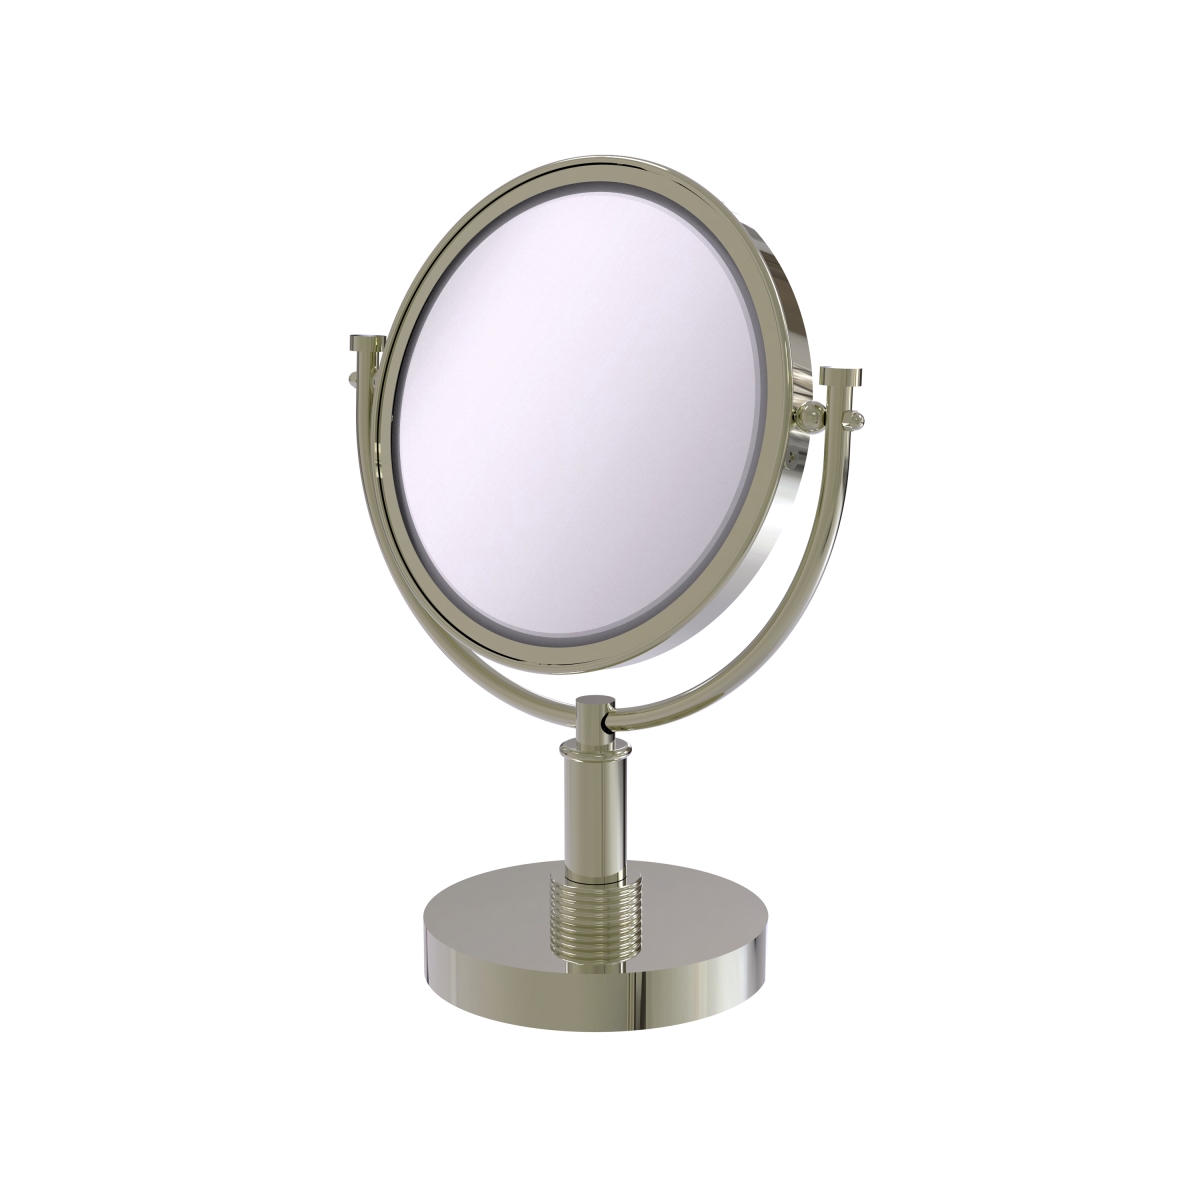 DM-4G-3X-PNI 8 in. Vanity Top Make-Up Mirror 3X Magnification, Polished Nickel - 15 x 8 x 8 in -  Allied Brass, DM-4G/3X-PNI